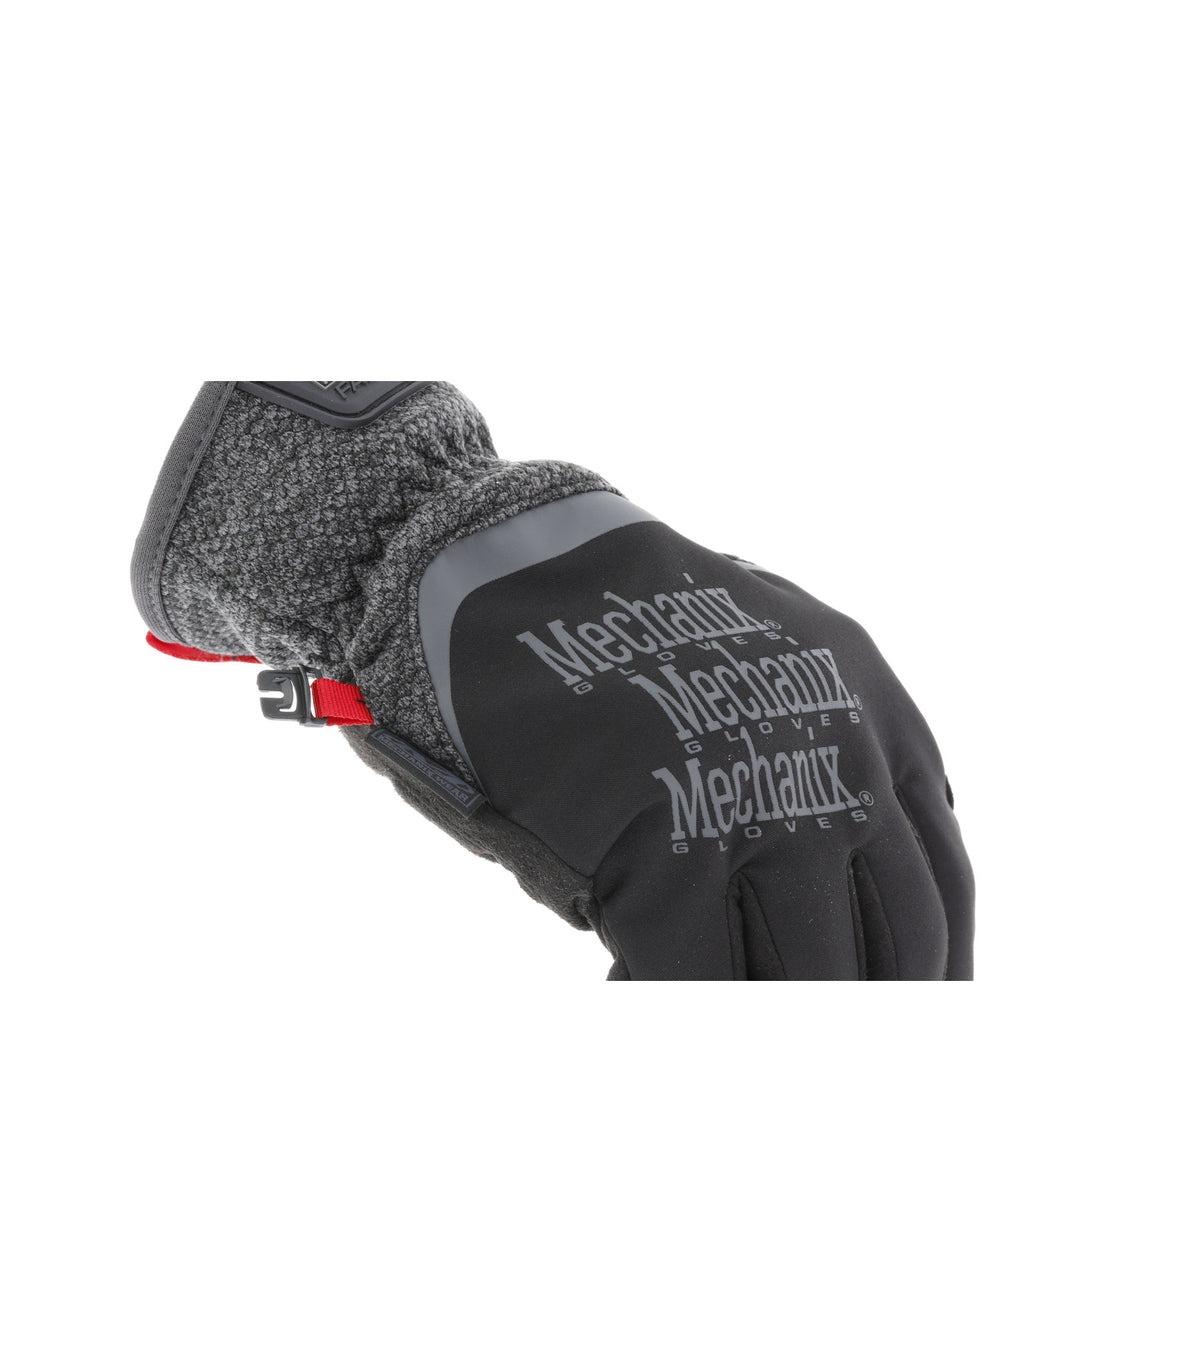 Mechanix Wear ColdWork FastFit gloves angled view, highlighting the snug cuff and dexterity for all-weather work.